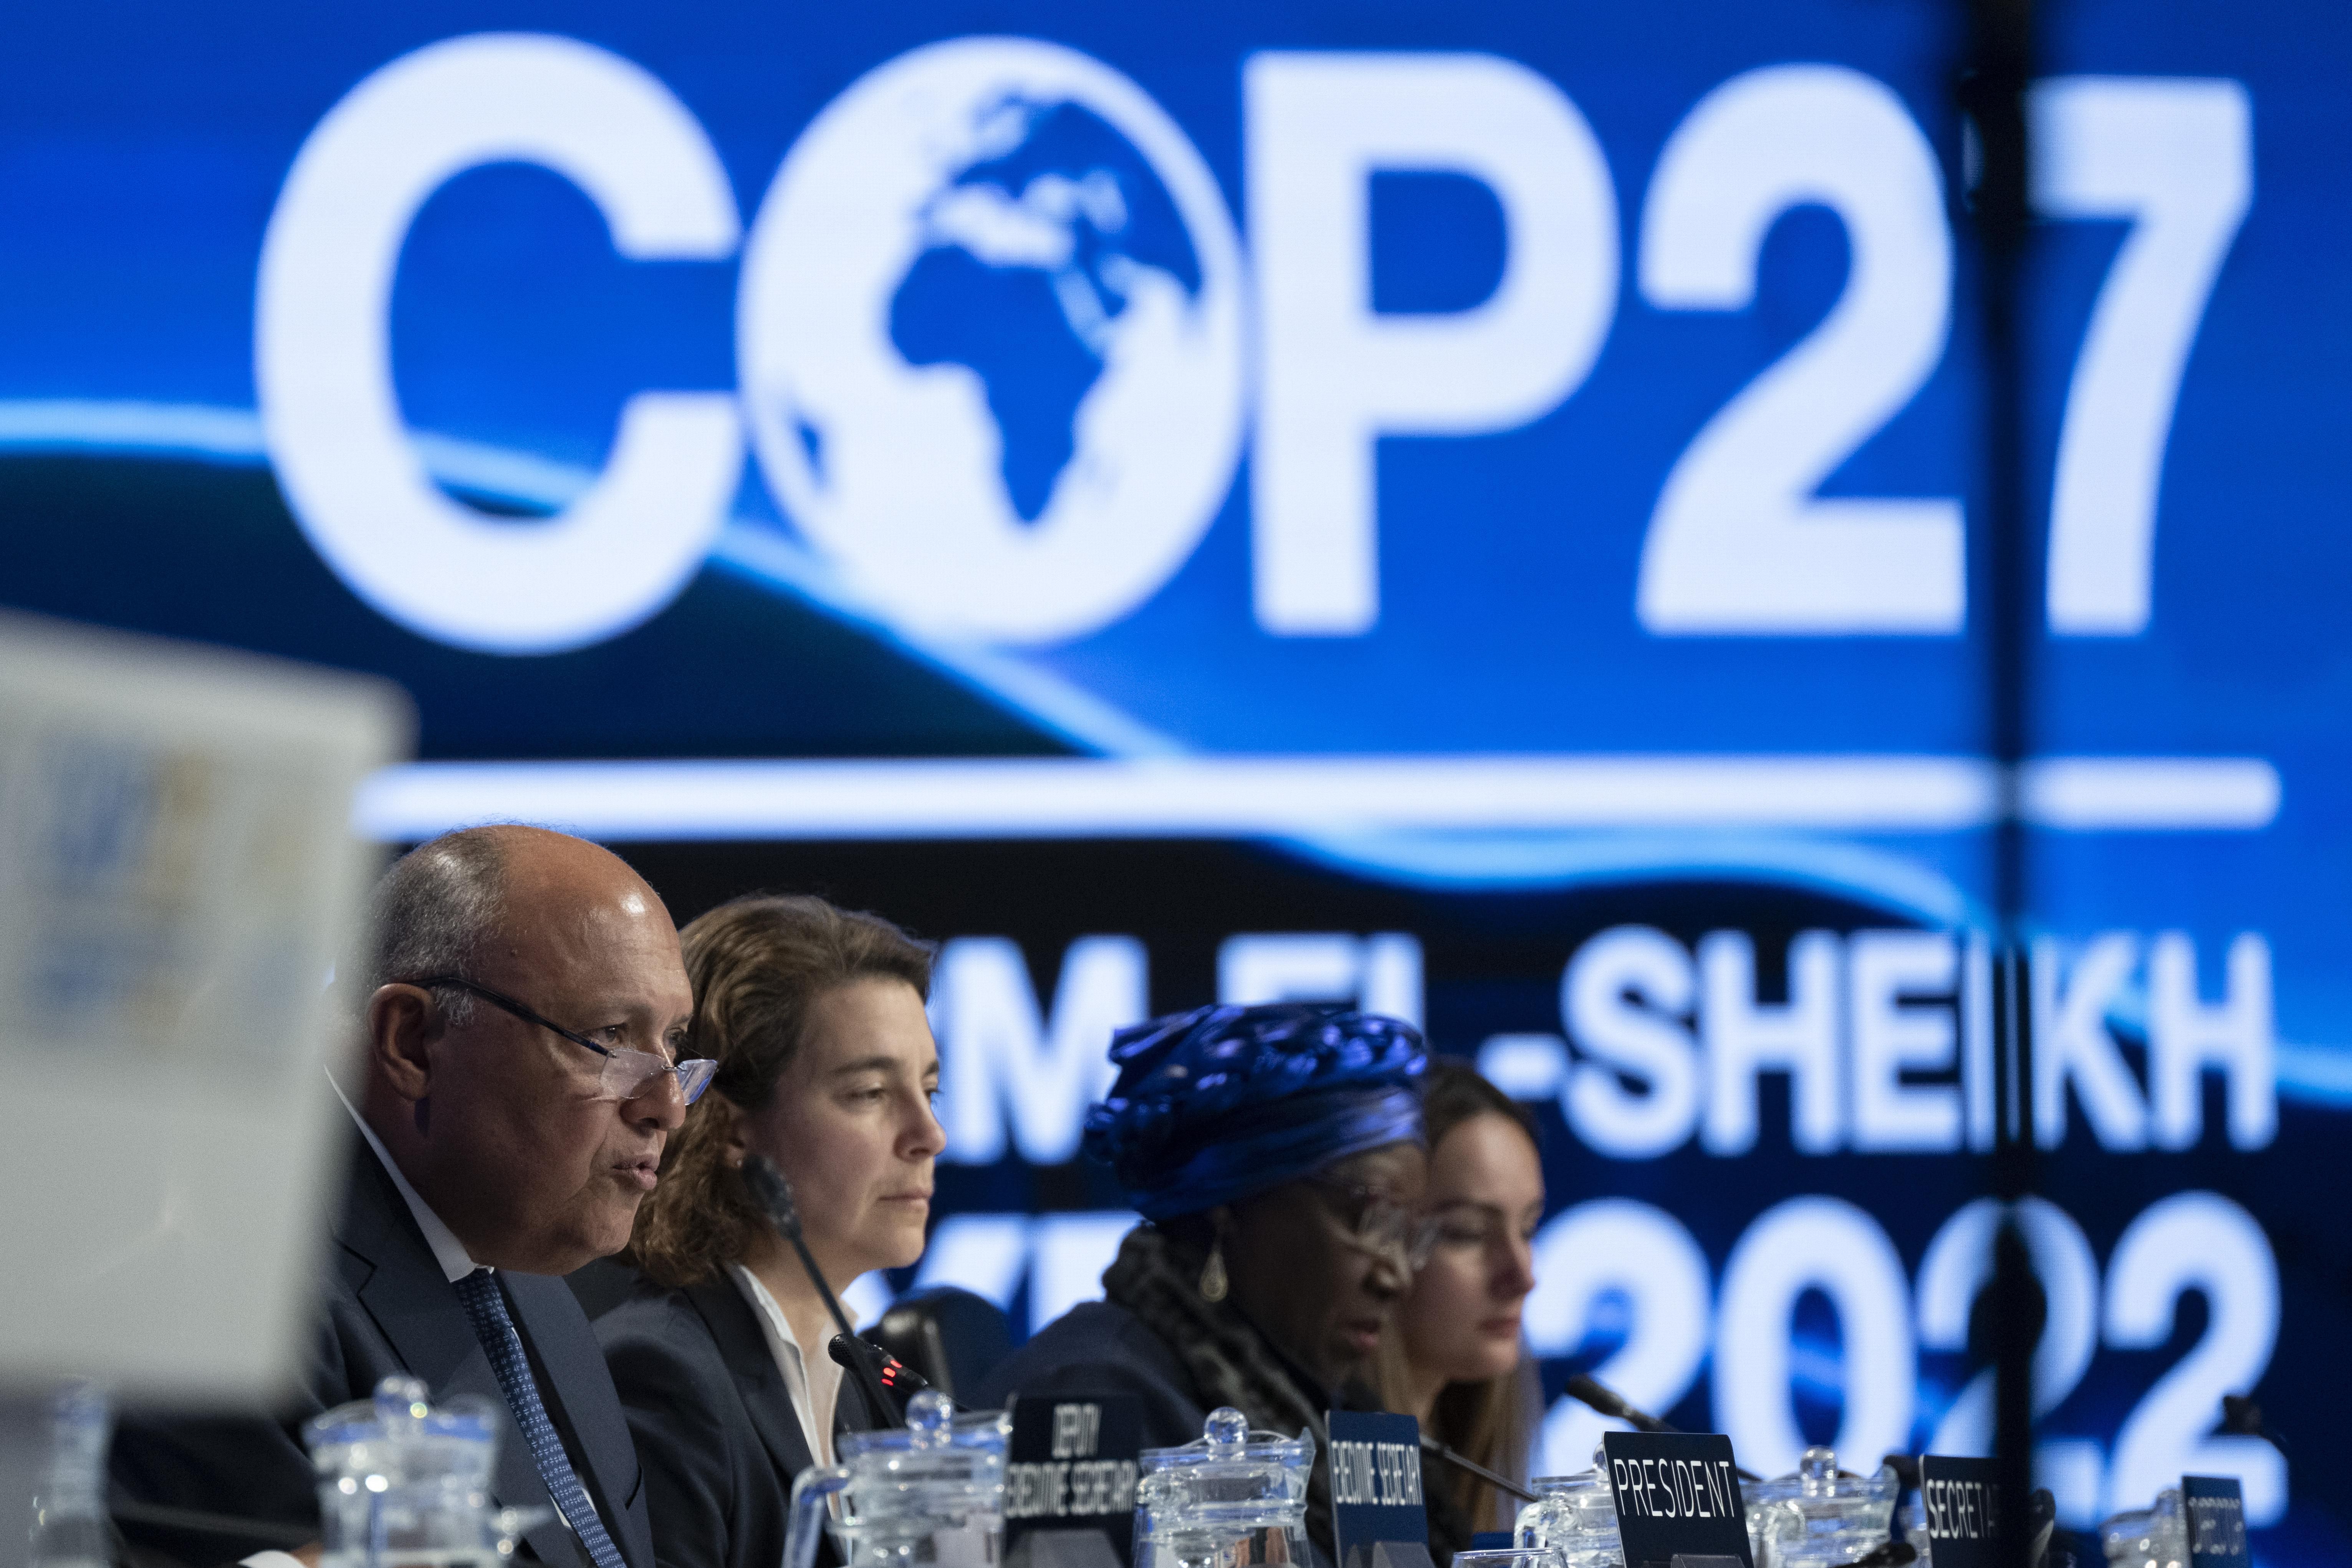 Egypt's Foreign Minister Samih Zhukri (l) speaks during the closing ceremony at the COP27 climate summit in Sharm el-Sheikh.